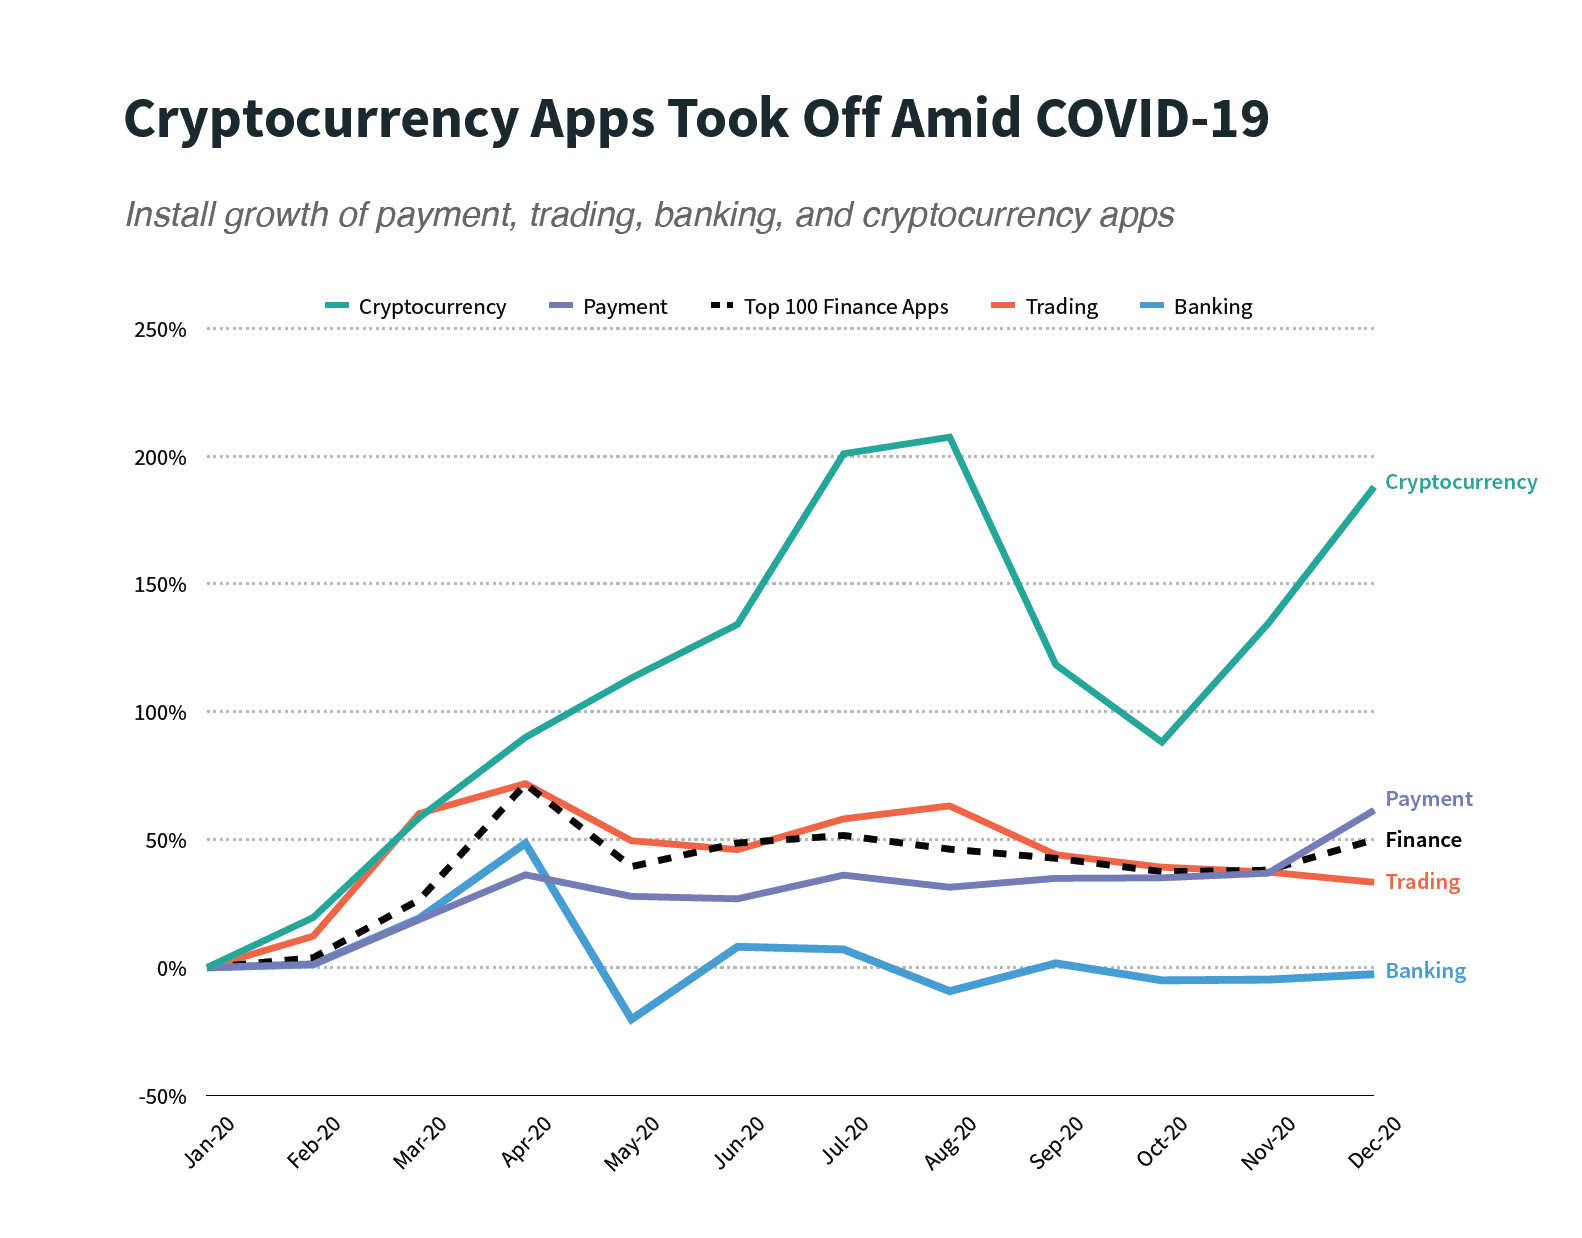 cryptocurrency apps growth 2020 graph Sensor Tower